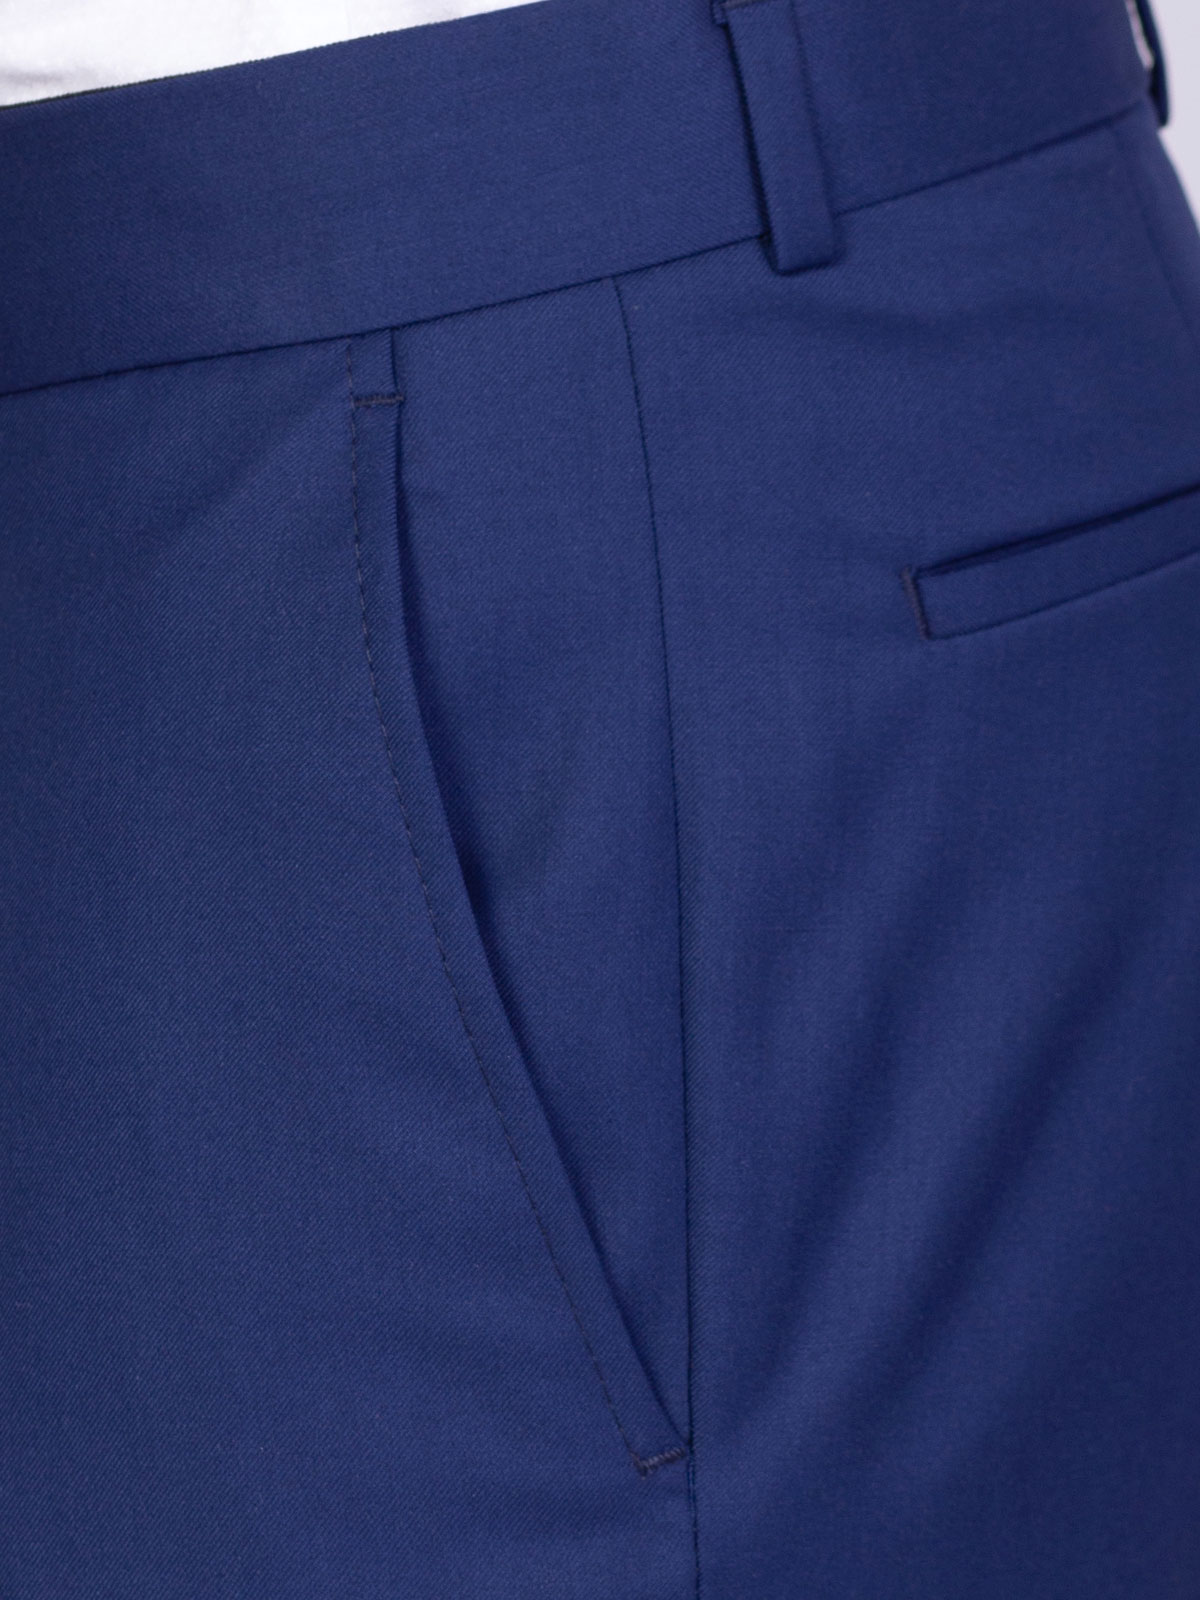 Classic trousers in blue - 63330 € 60.74 img3